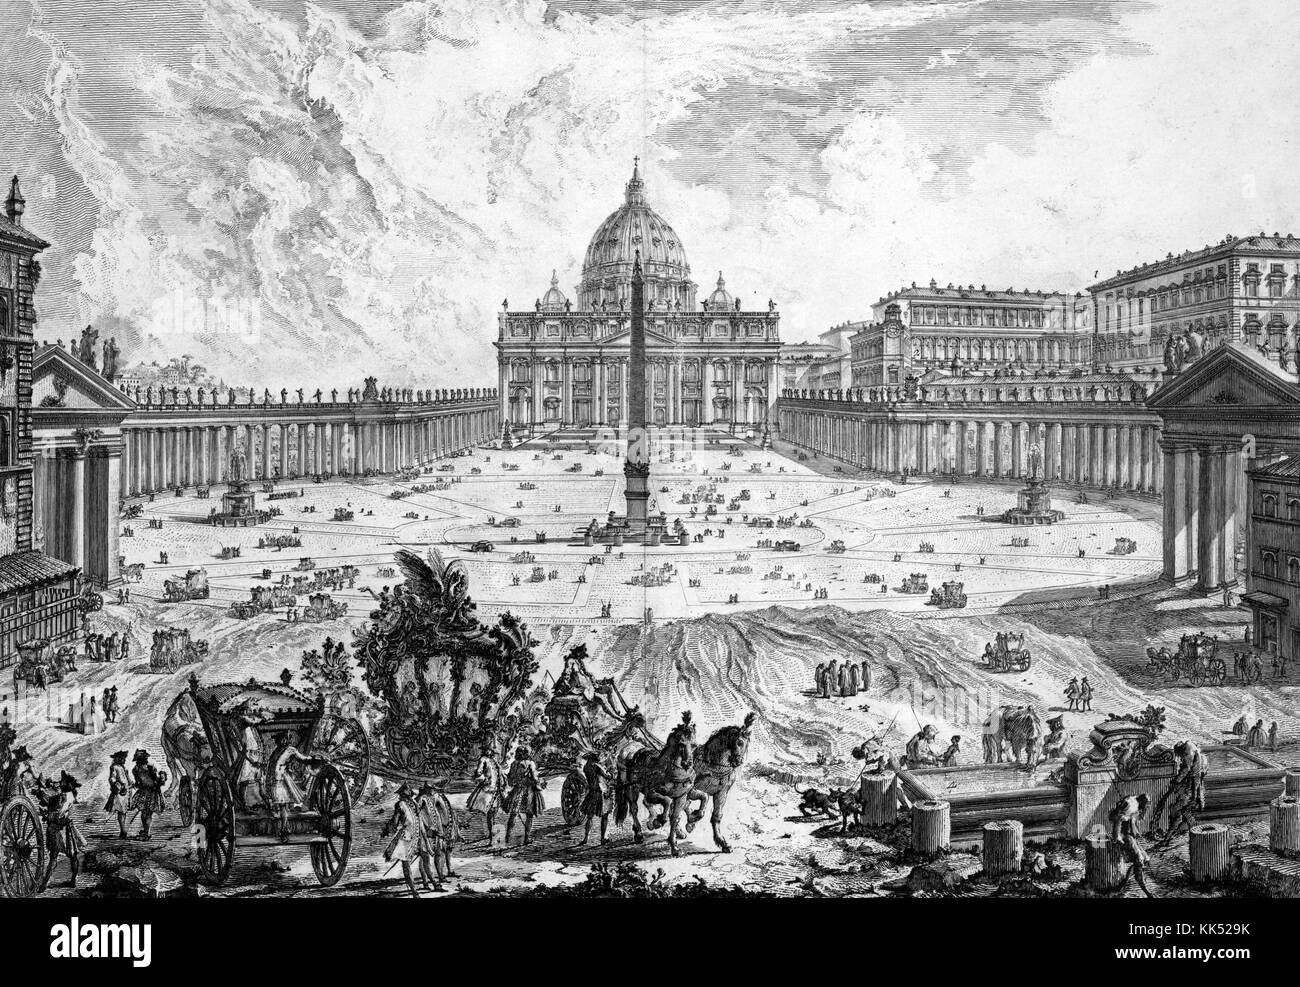 An engraving depicting St Peter's Basilica which is seen at the far end of the image, the building was constructed on the burial site of St Peter, the walled in area leading away from the basilica is called St Peter's Square, the Vatican Obelisk that stands in the middle of the image was brought from Egypt to Rome by Nero in 40 AD and moved to its current location in 1586, Vatican City, Rome, Italy, 1749. From the New York Public Library. Stock Photo